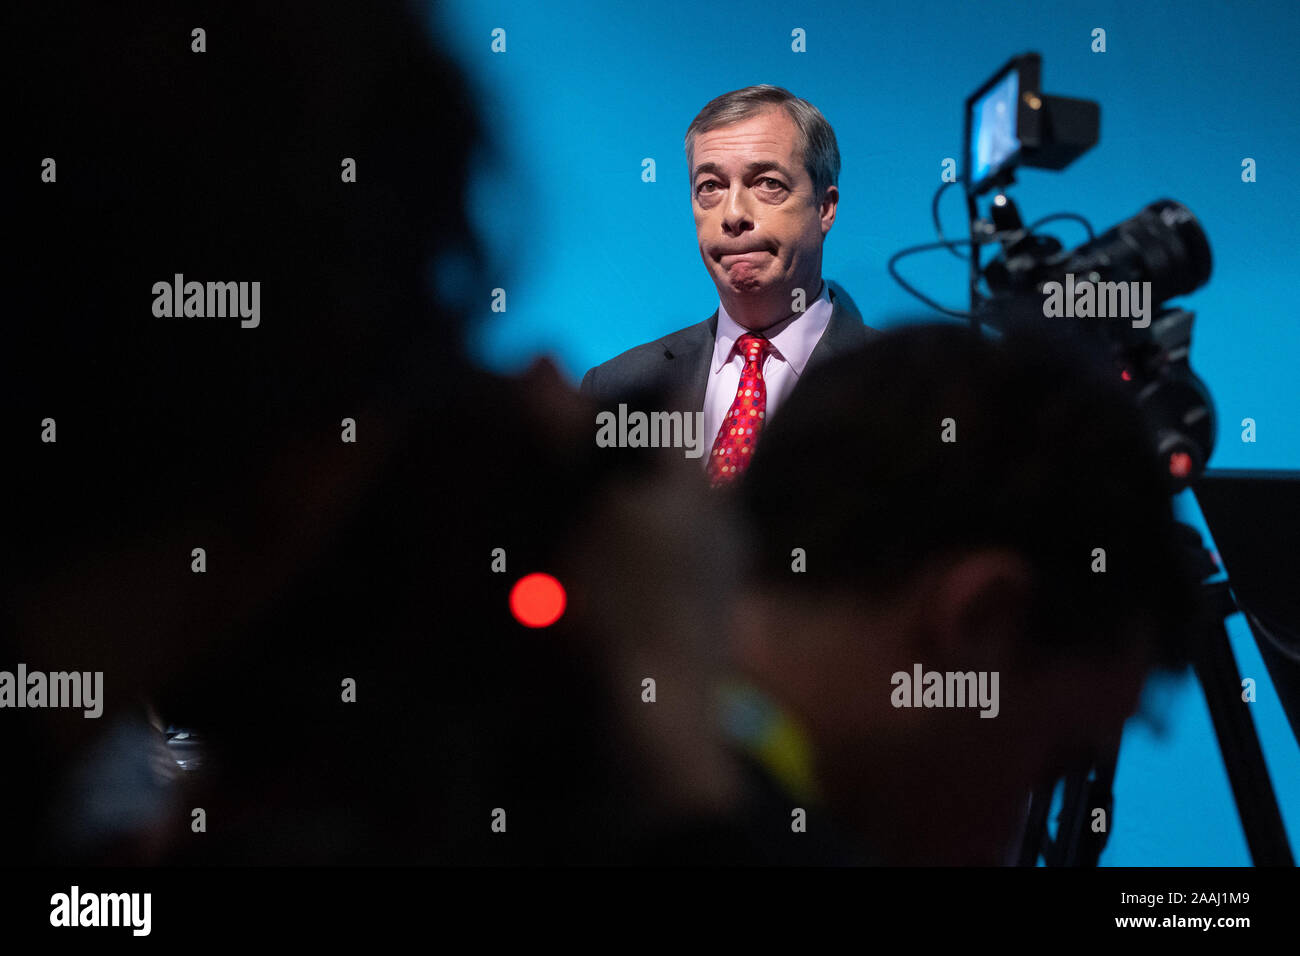 Brexit Party leader Nigel Farage during the party's policy launch in Westminster, London. PA Photo. Picture date: Friday November 22, 2019. See PA story POLITICS Election. Photo credit should read: Dominic Lipinski/PA Wire Stock Photo